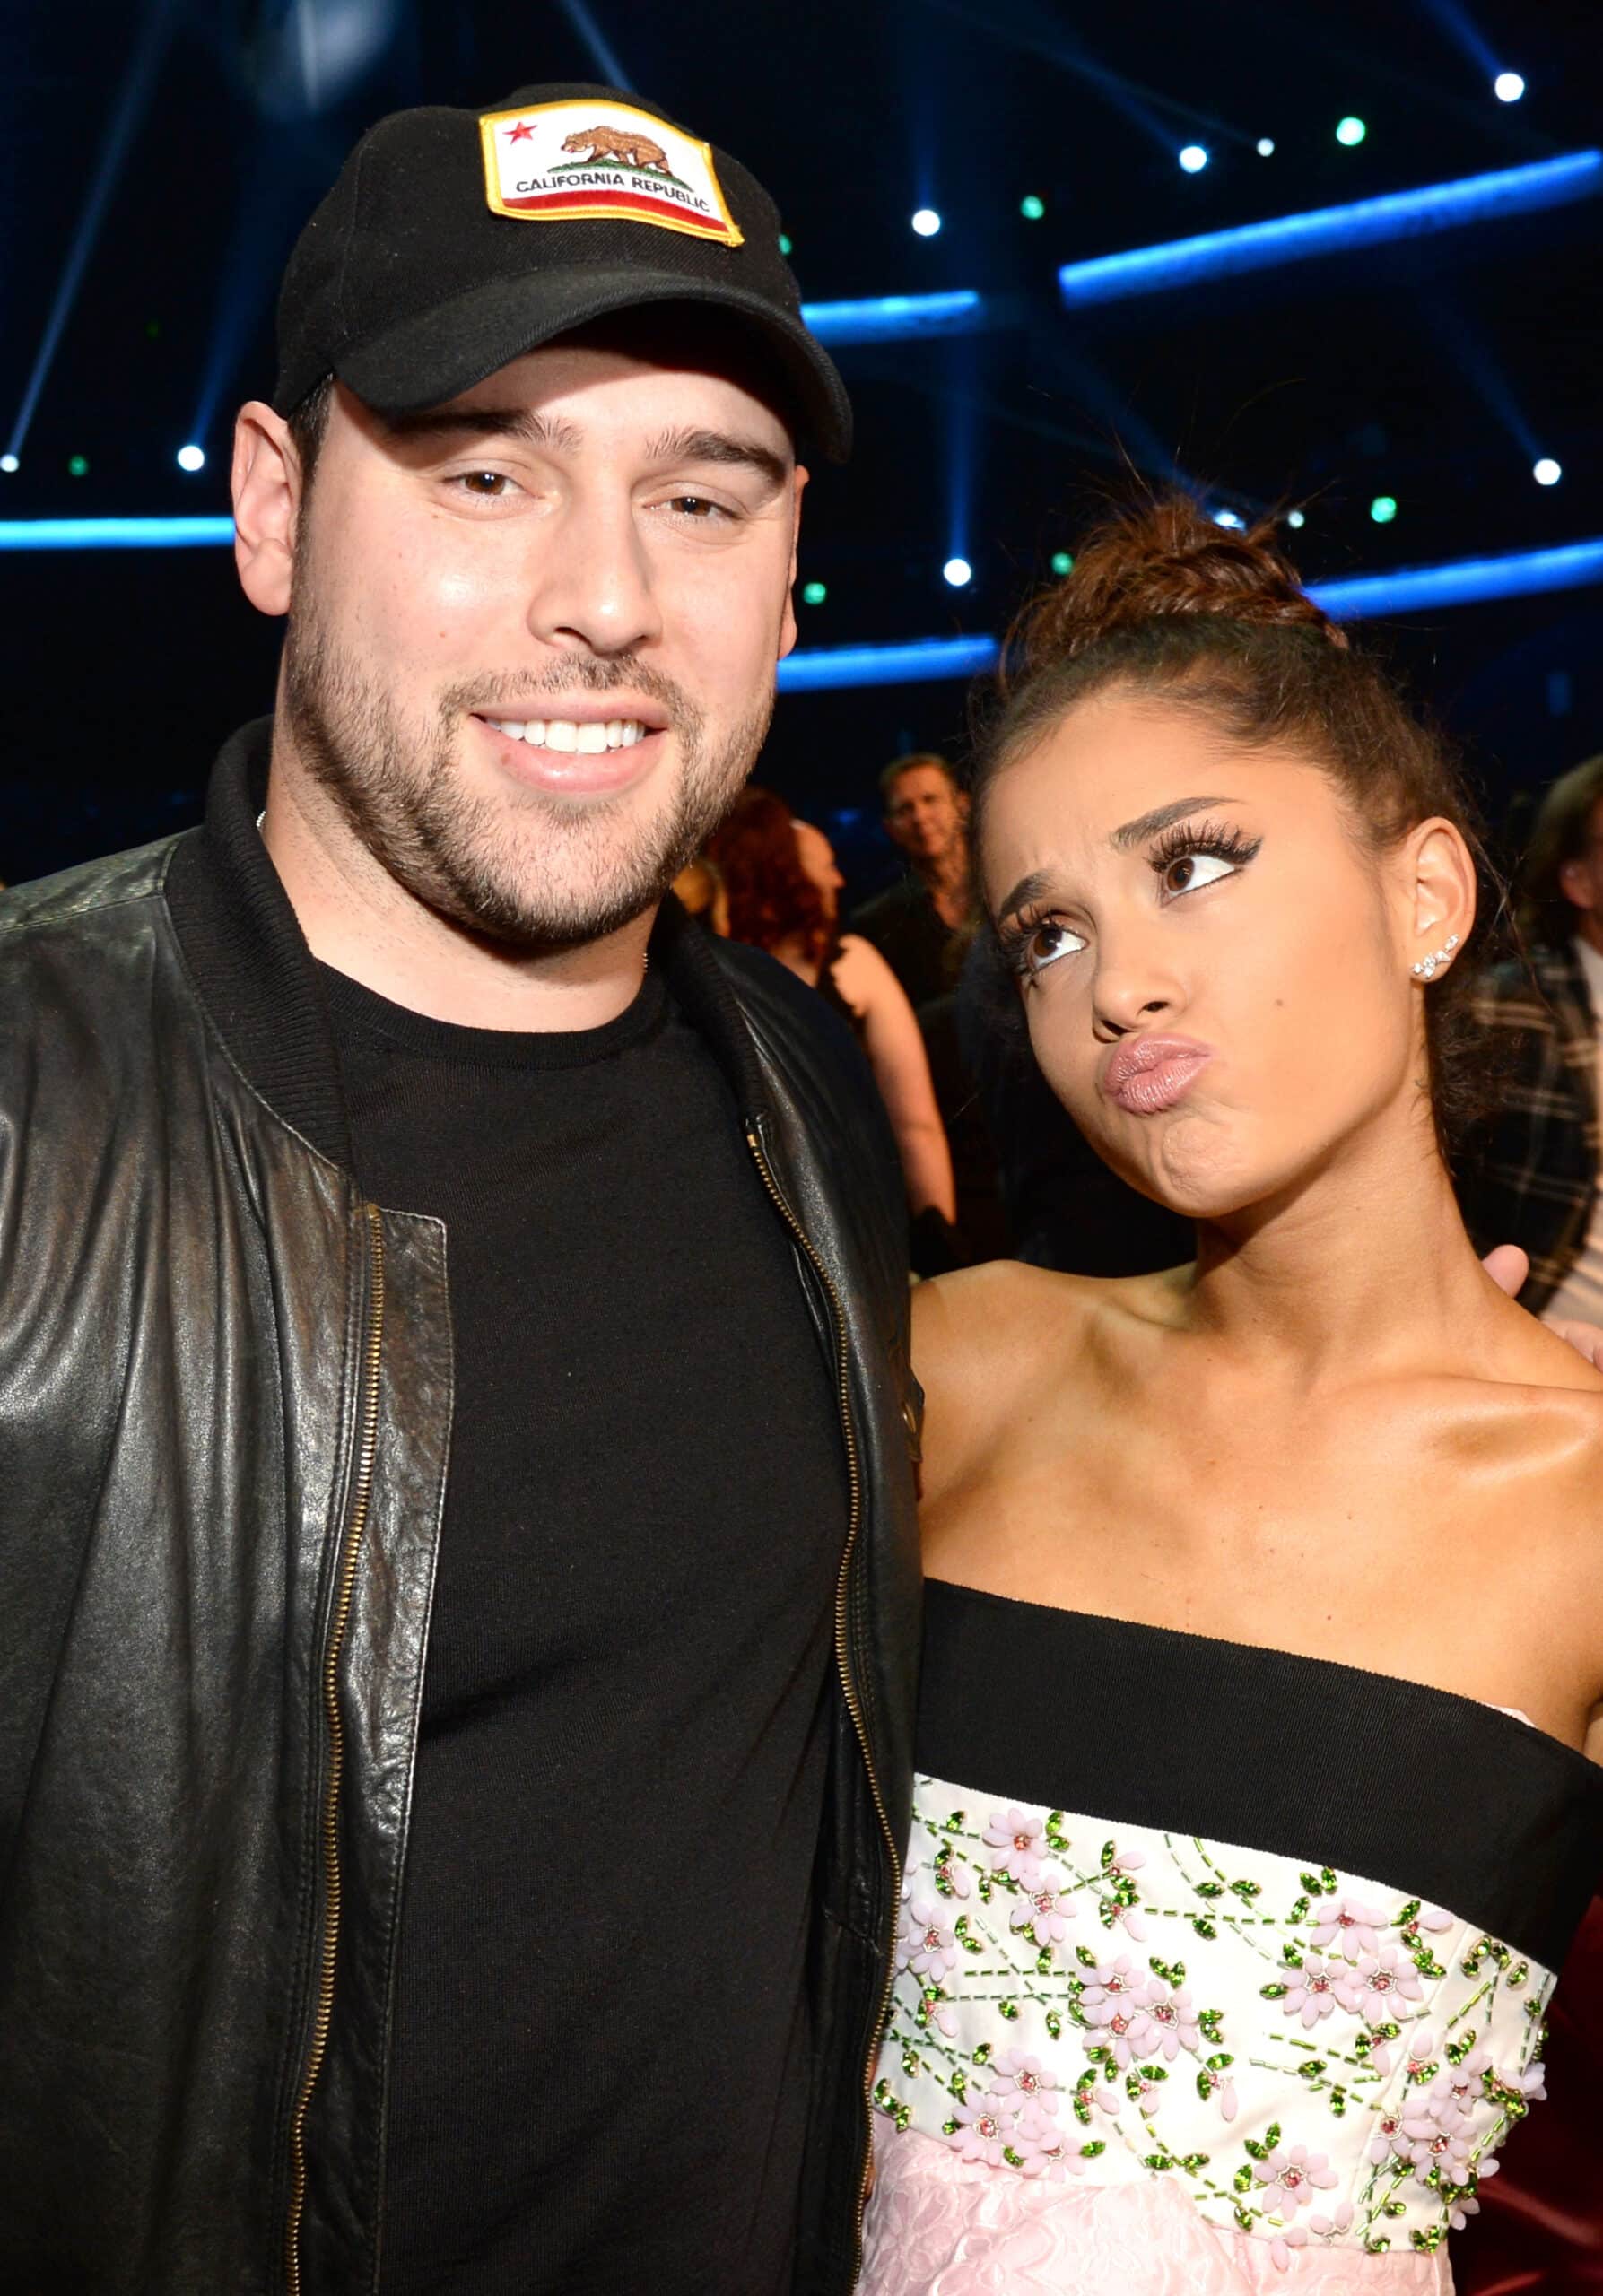 LOS ANGELES, CA - NOVEMBER 22: Scooter Braun and Ariana Grande attend the 2015 American Music Awards at Microsoft Theater on November 22, 2015 in Los Angeles, California.